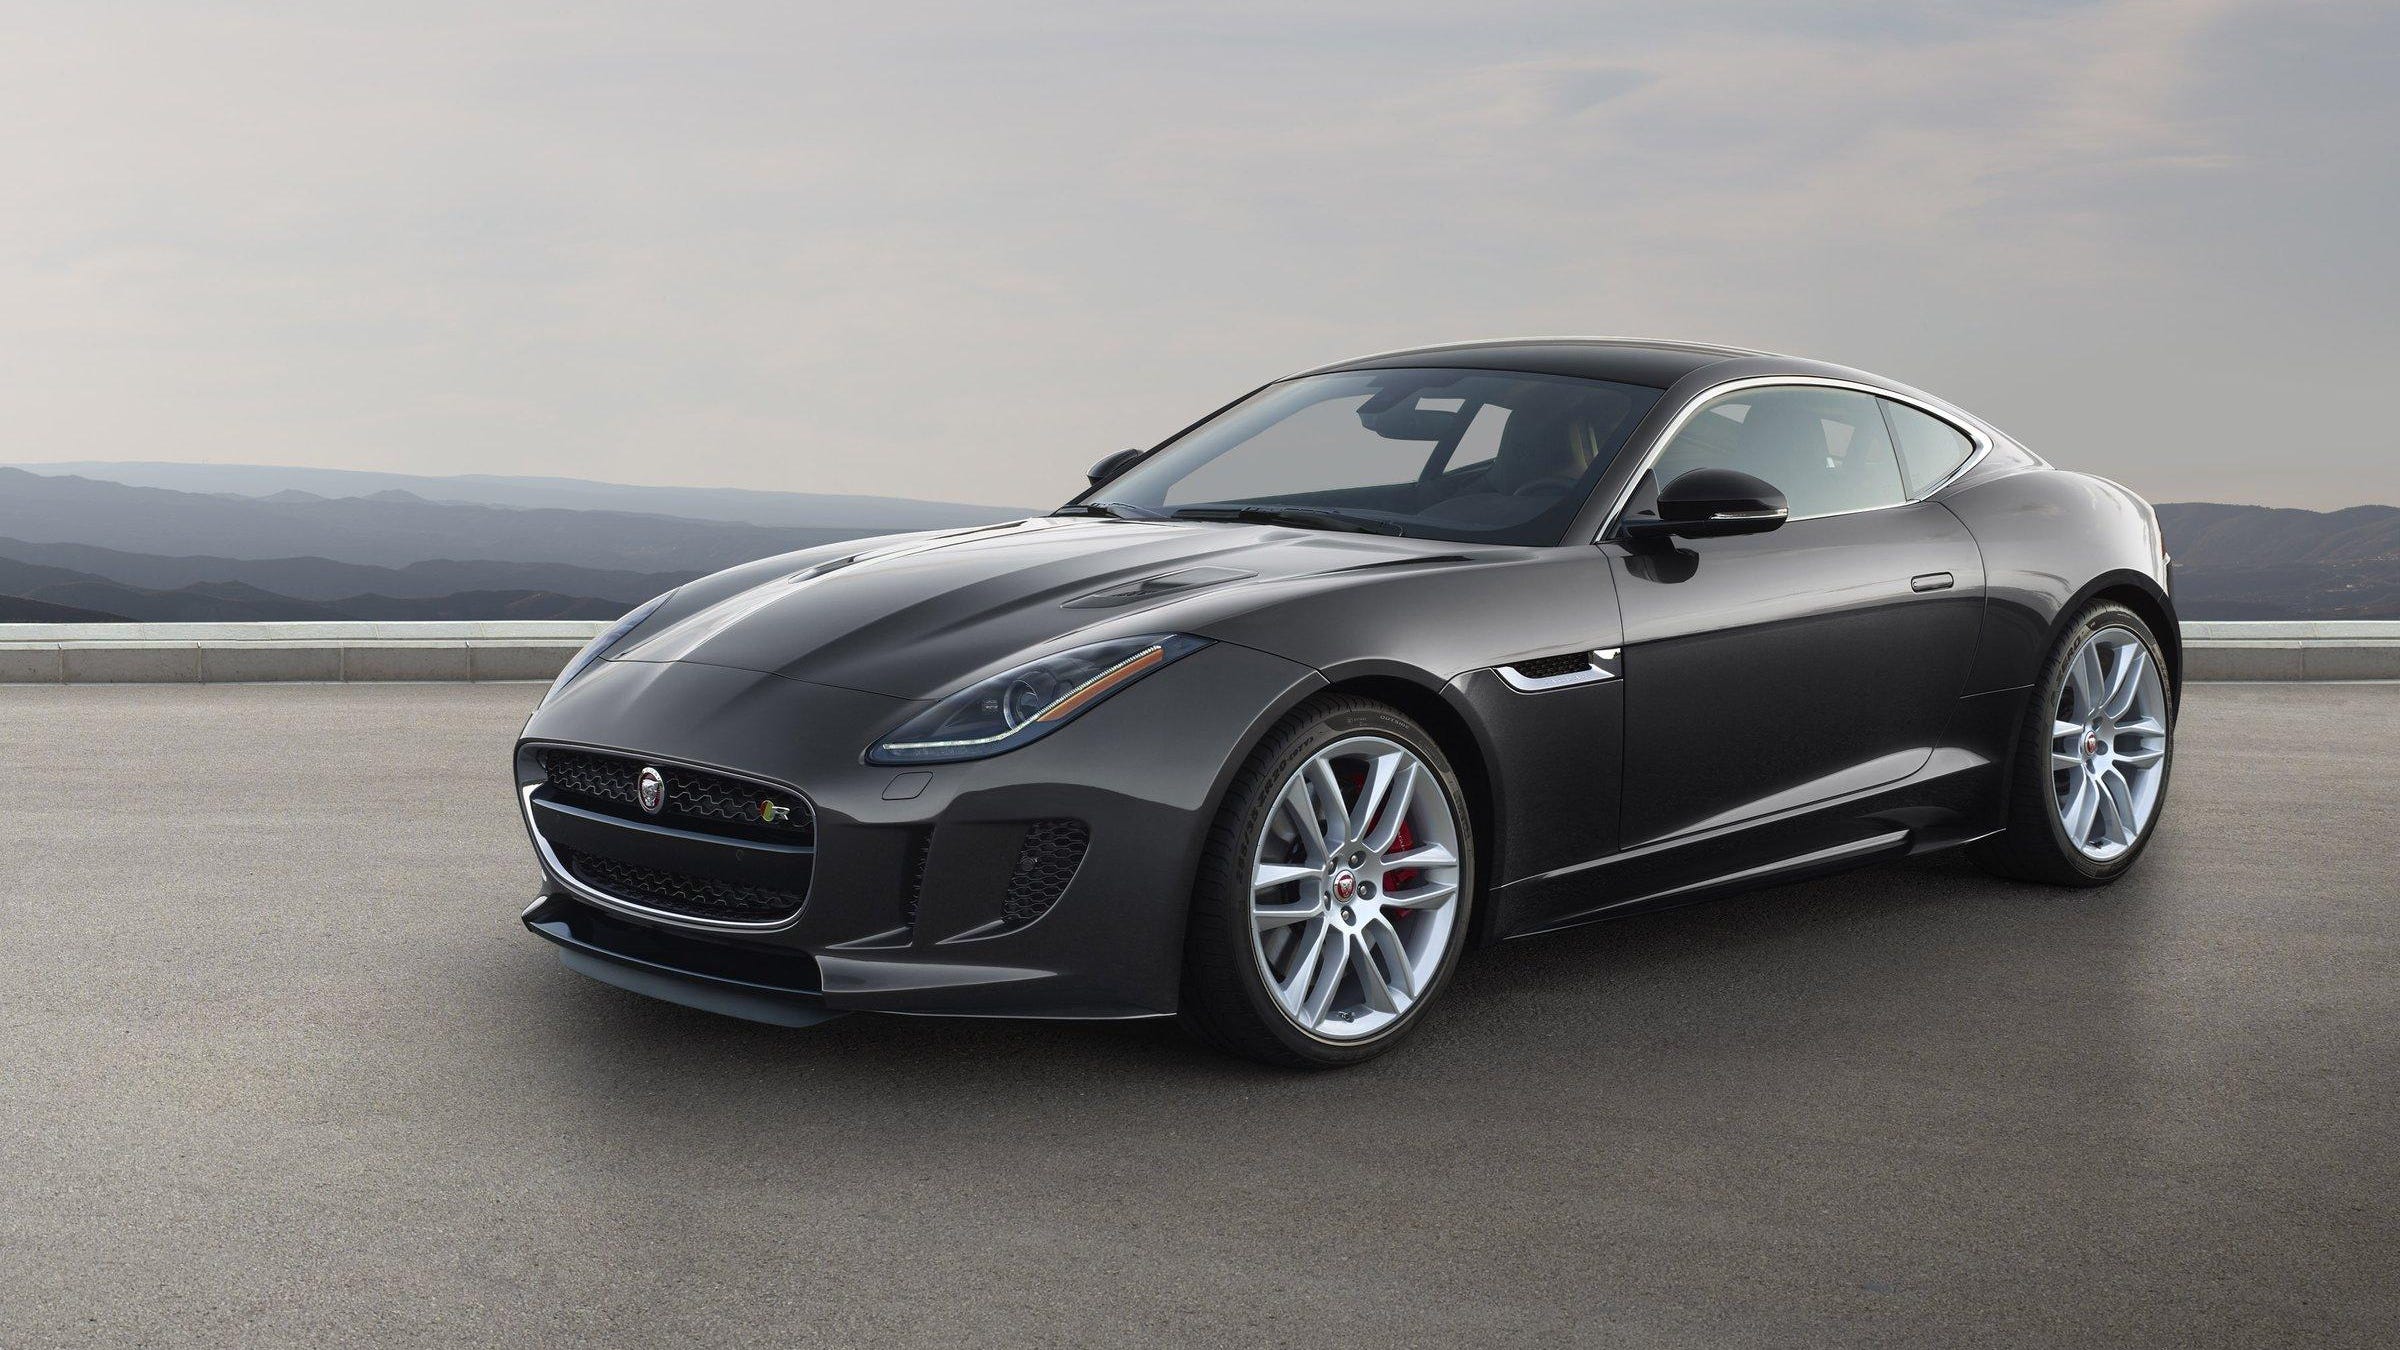 Review: AWD turns 2016 Jaguar F-type into a car for any season